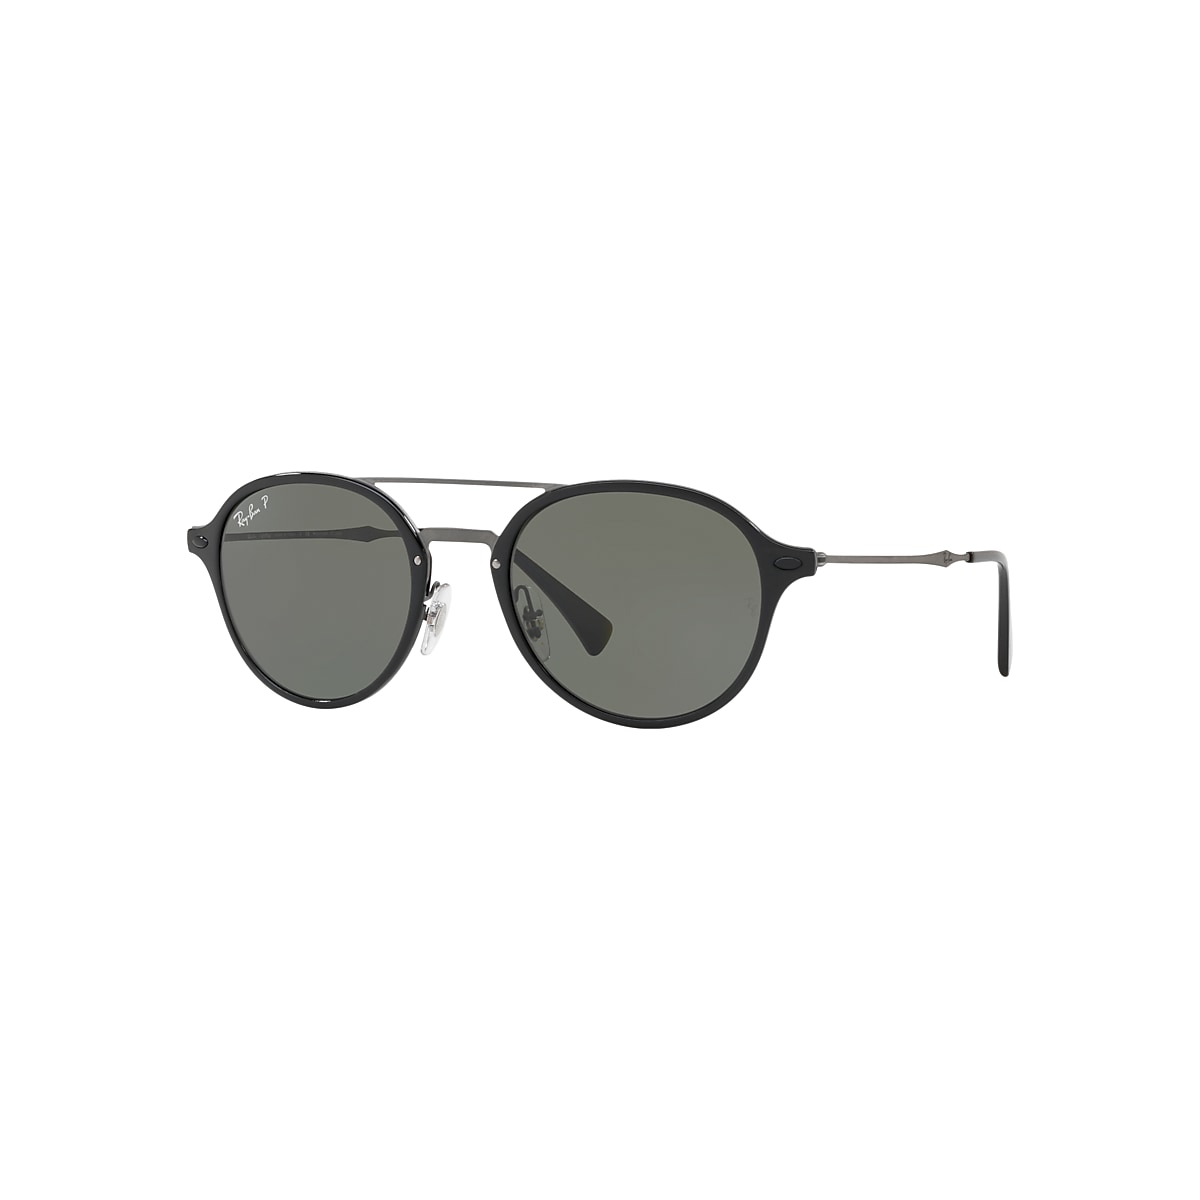 Rb4287 Sunglasses in Black and Green | Ray-Ban®